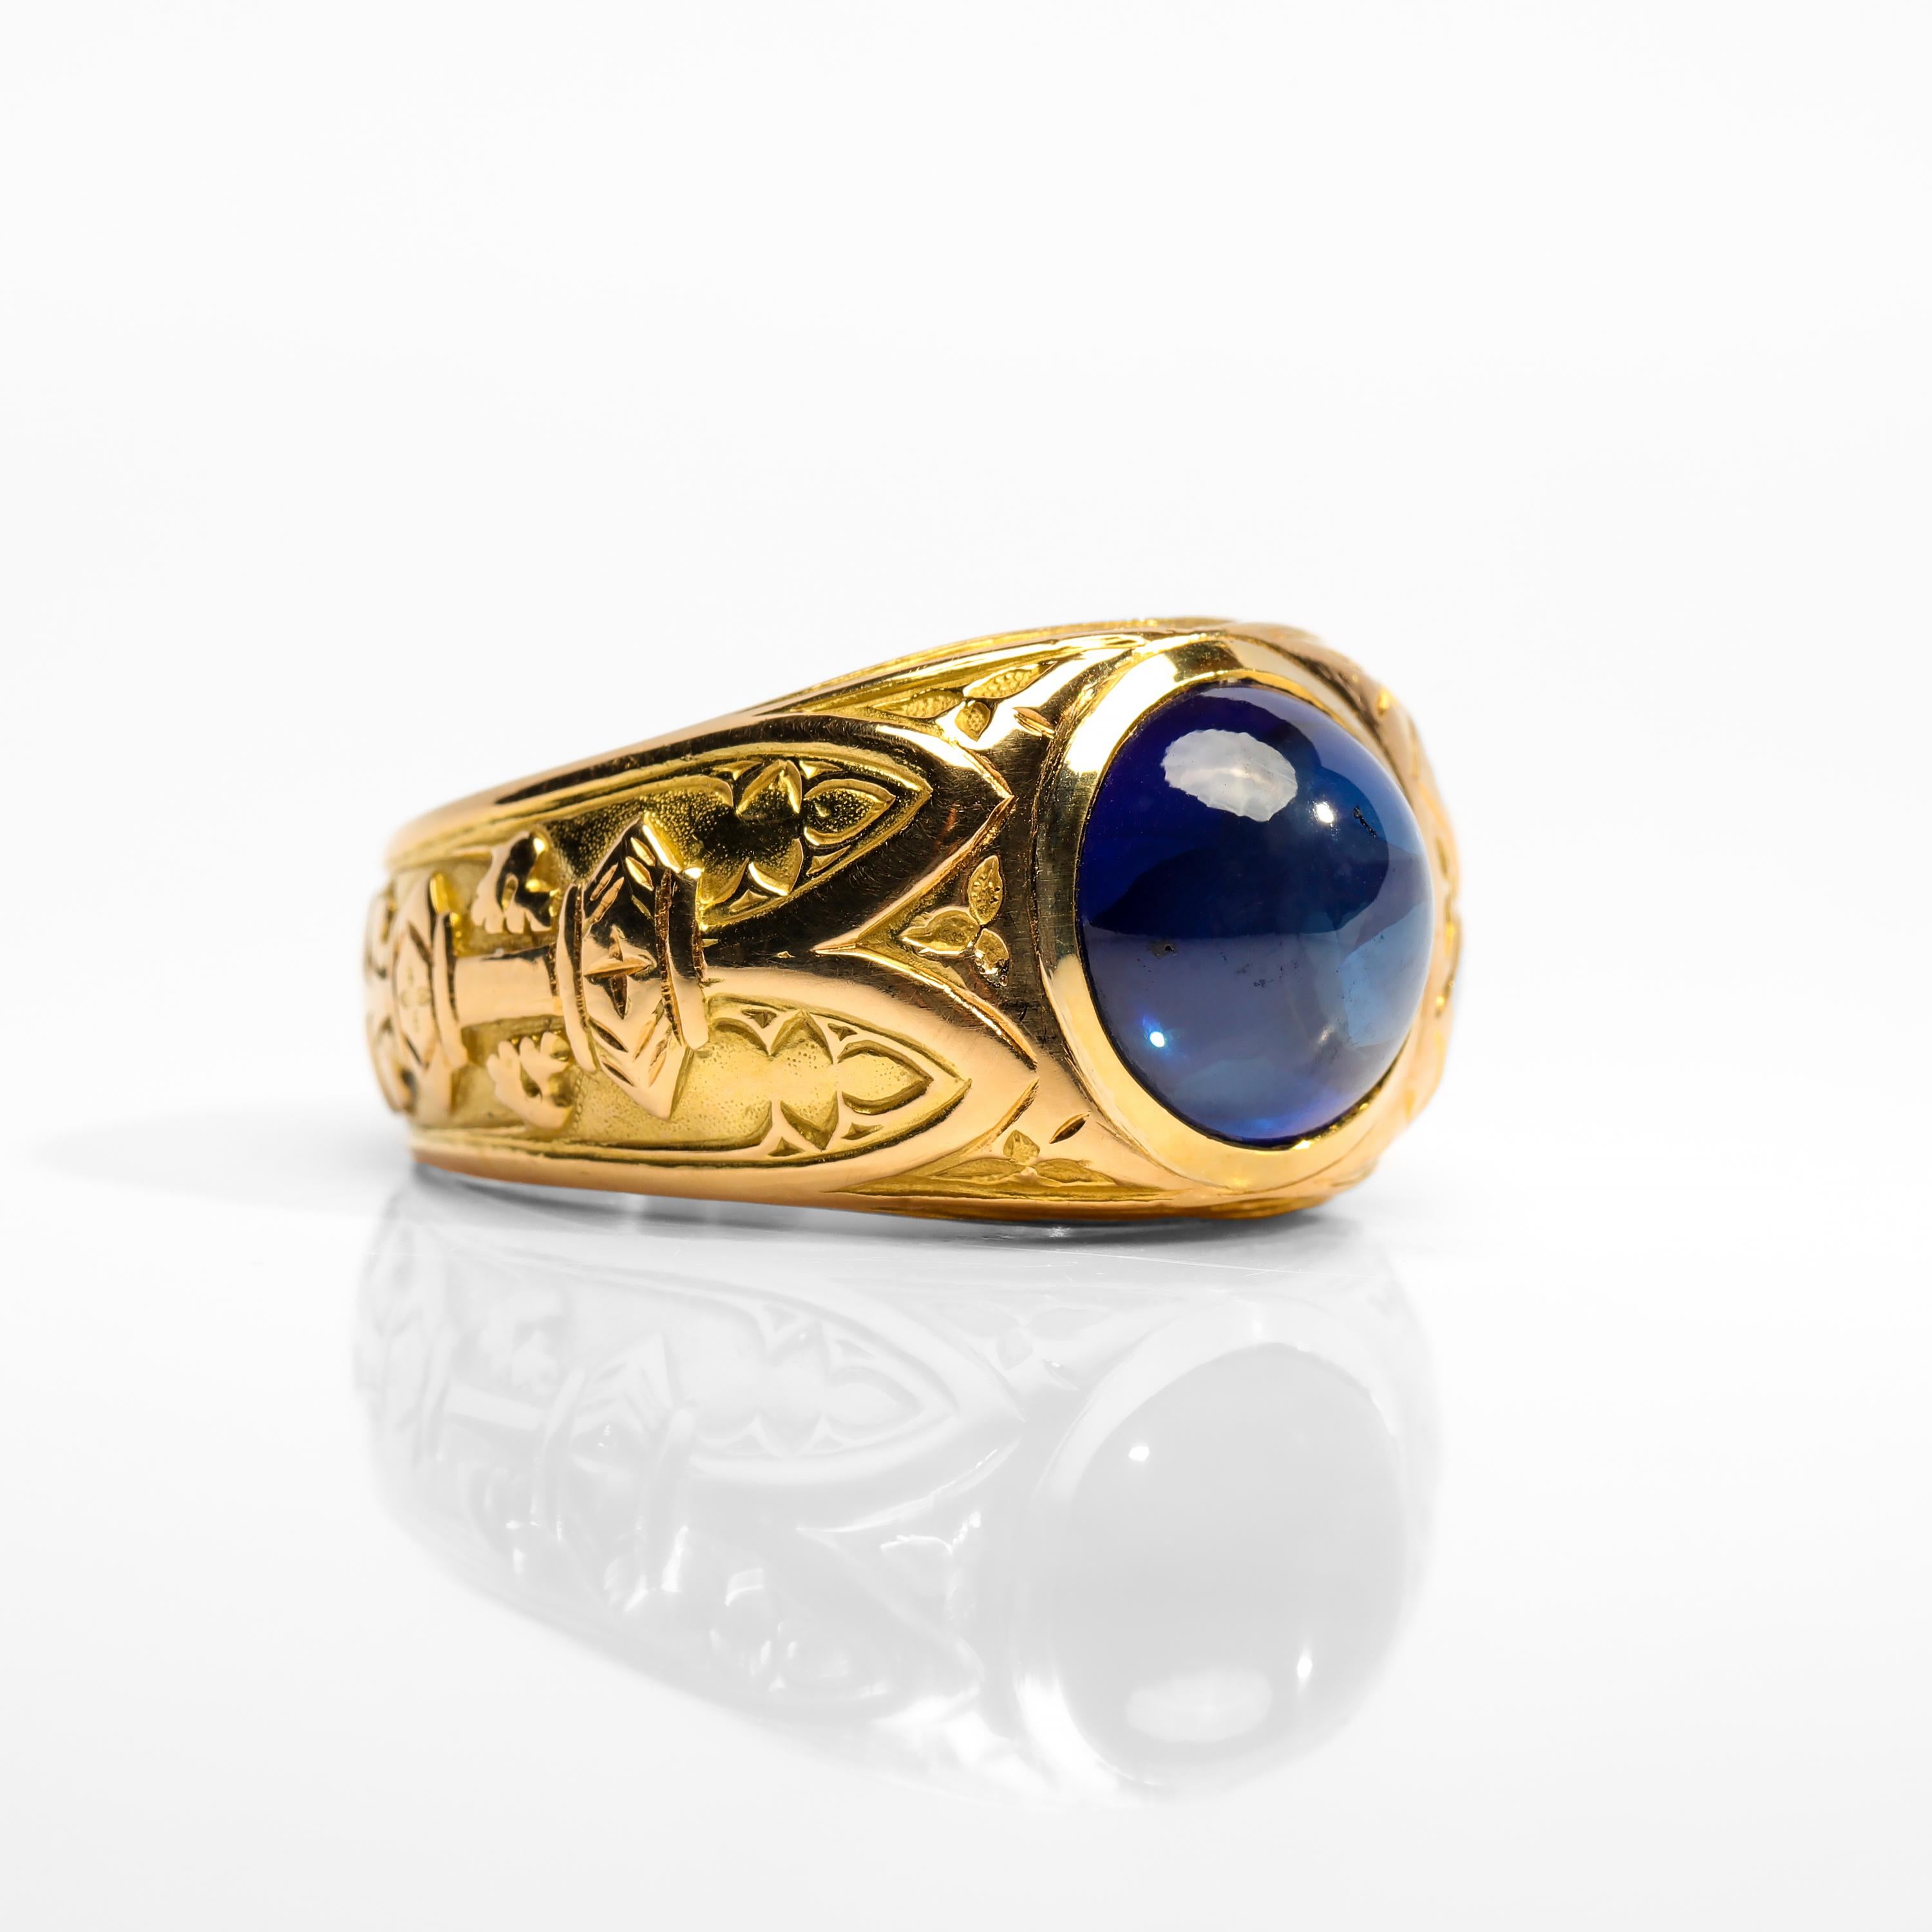 Women's or Men's Tiffany & Co. Gilded Age Men's Sapphire Ring as Featured in the New York Times